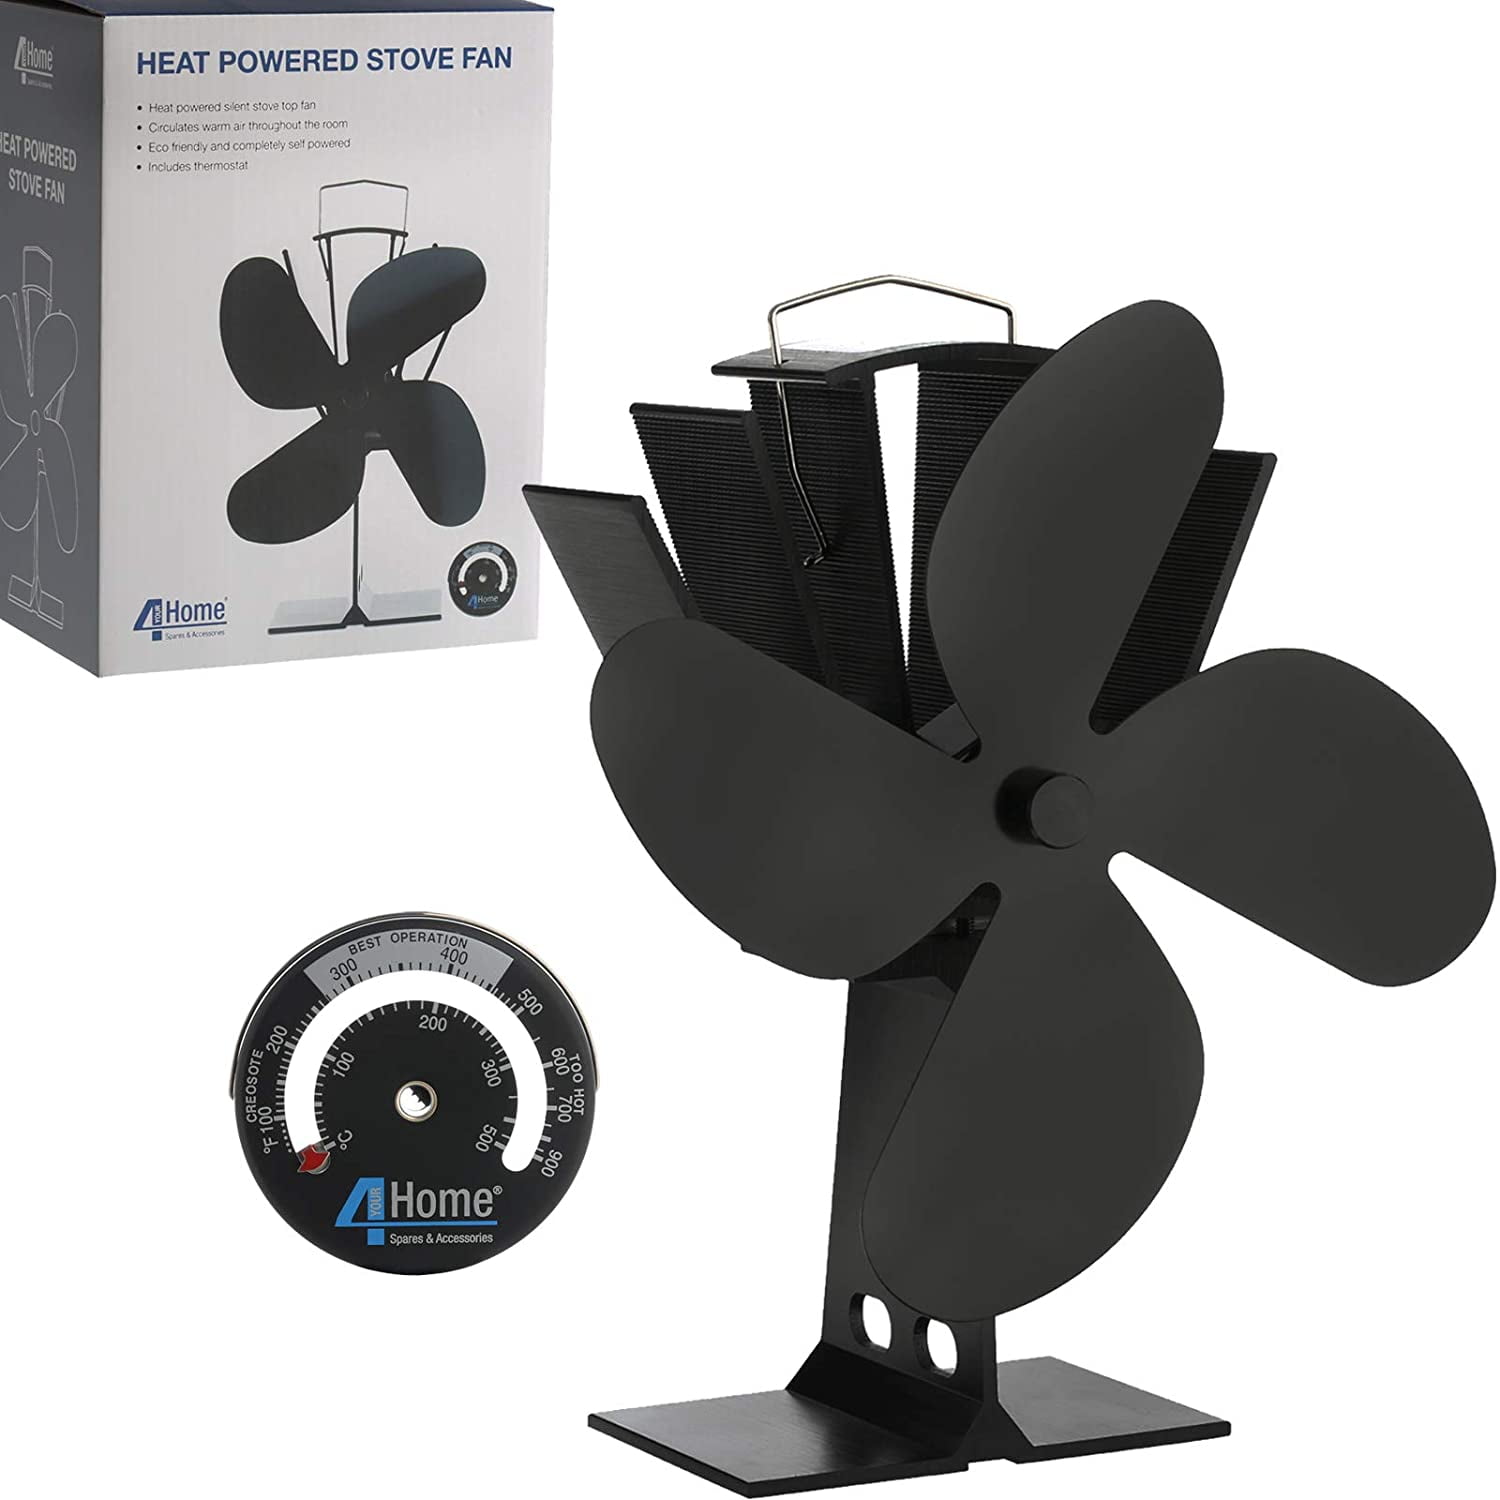 Silent Eco Stove Fan Galafire Stove Fan for Wood/Log Burner,Heat Powered Circulates Warm/Heated Air Stove Thermometer Fireplace Fan 4 Blades Black 